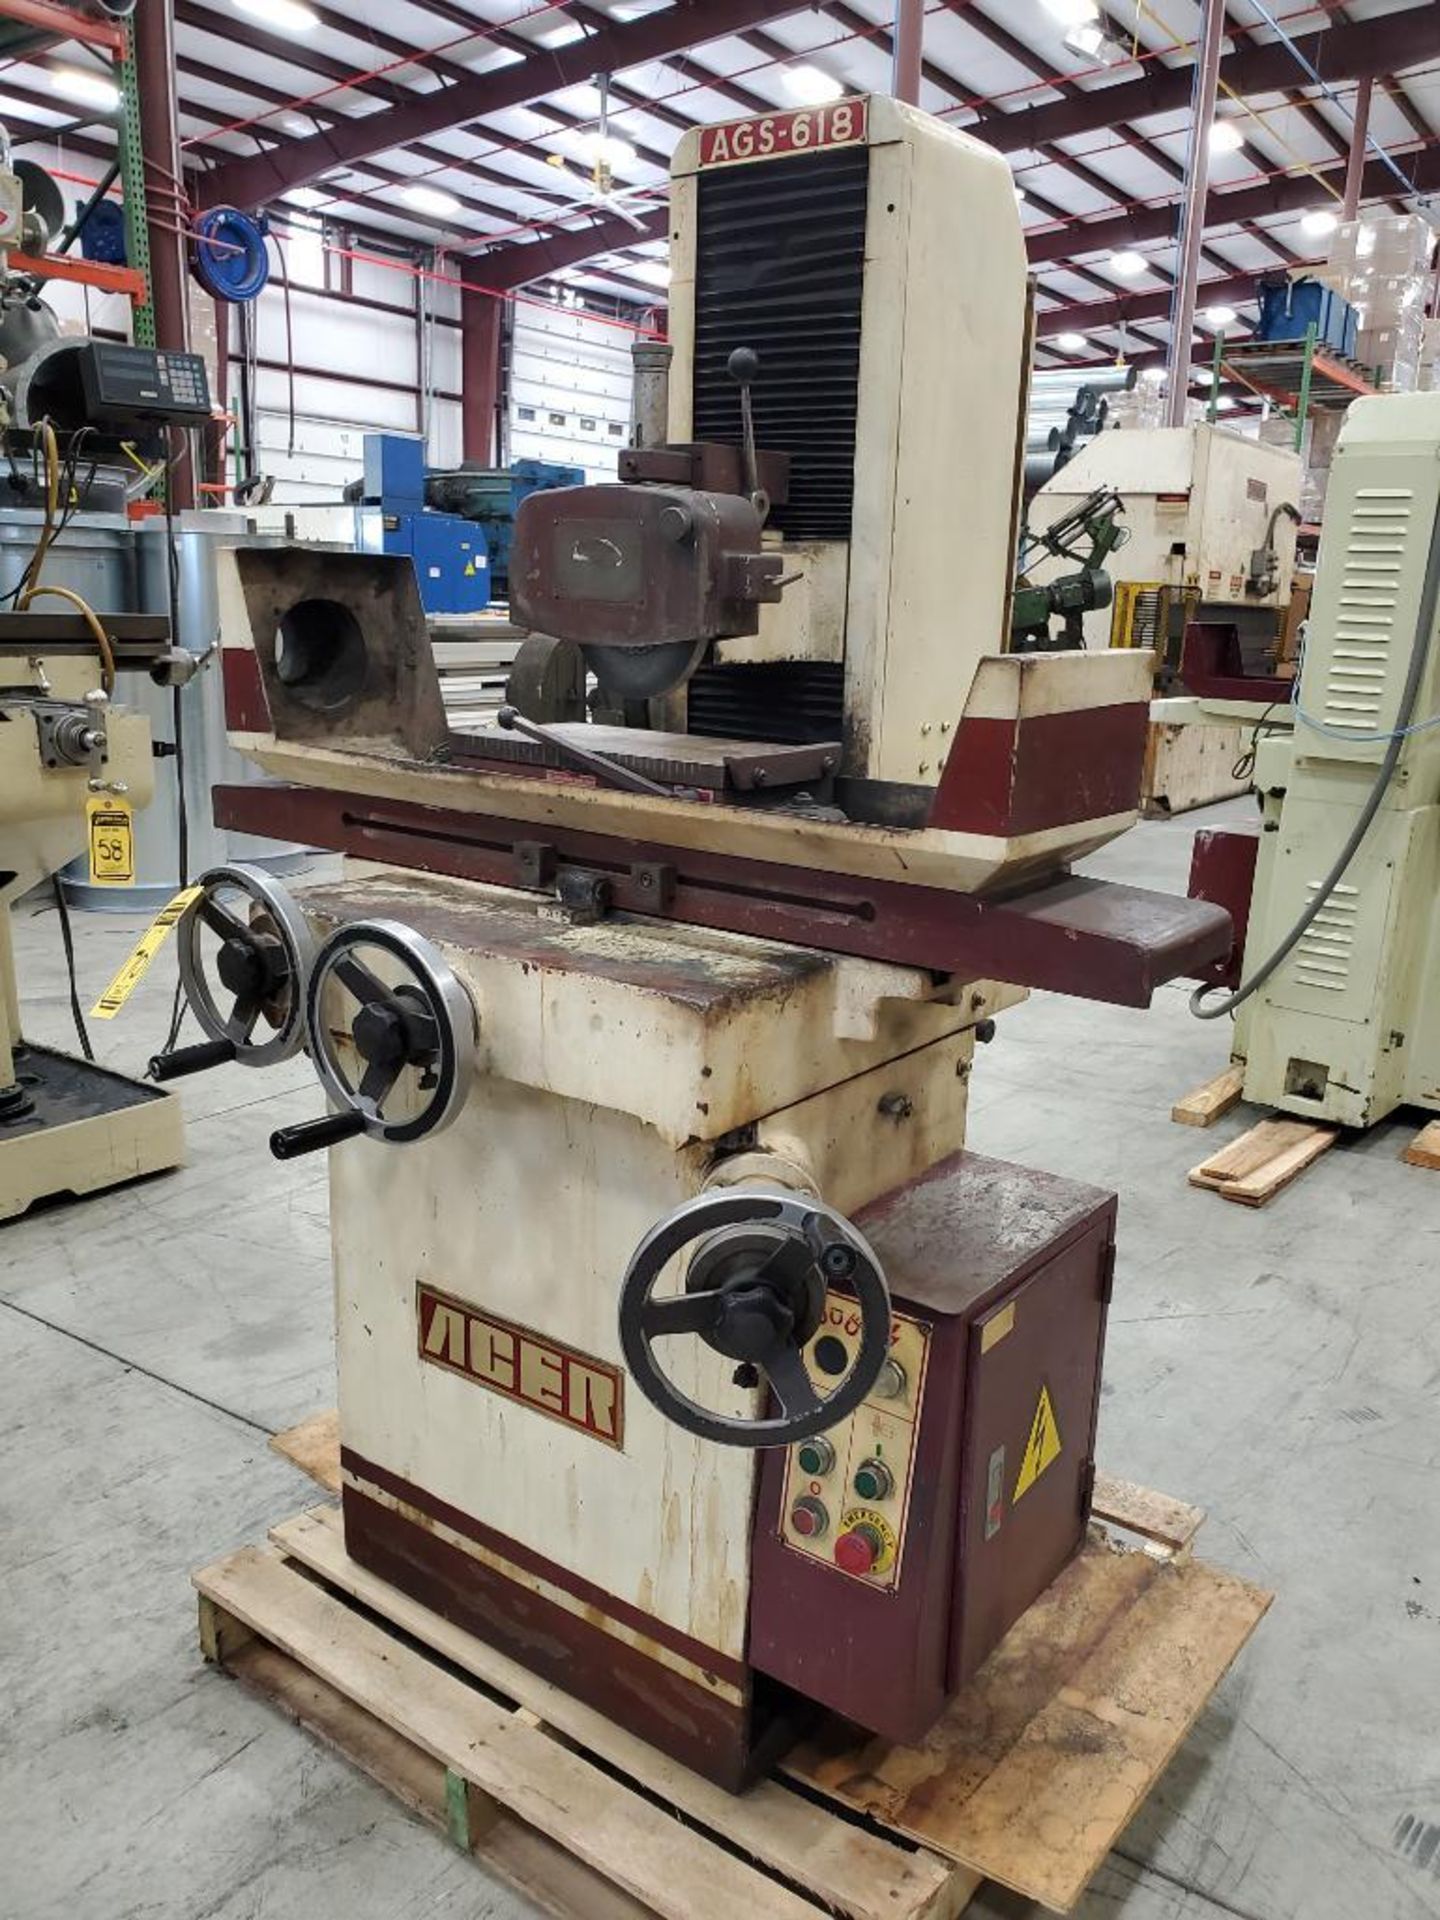 1997 Acer AGS-618N Hand Feed Surface Grinder, Suburban 15" x 8" PMC, S/N 7031026 - Image 2 of 6